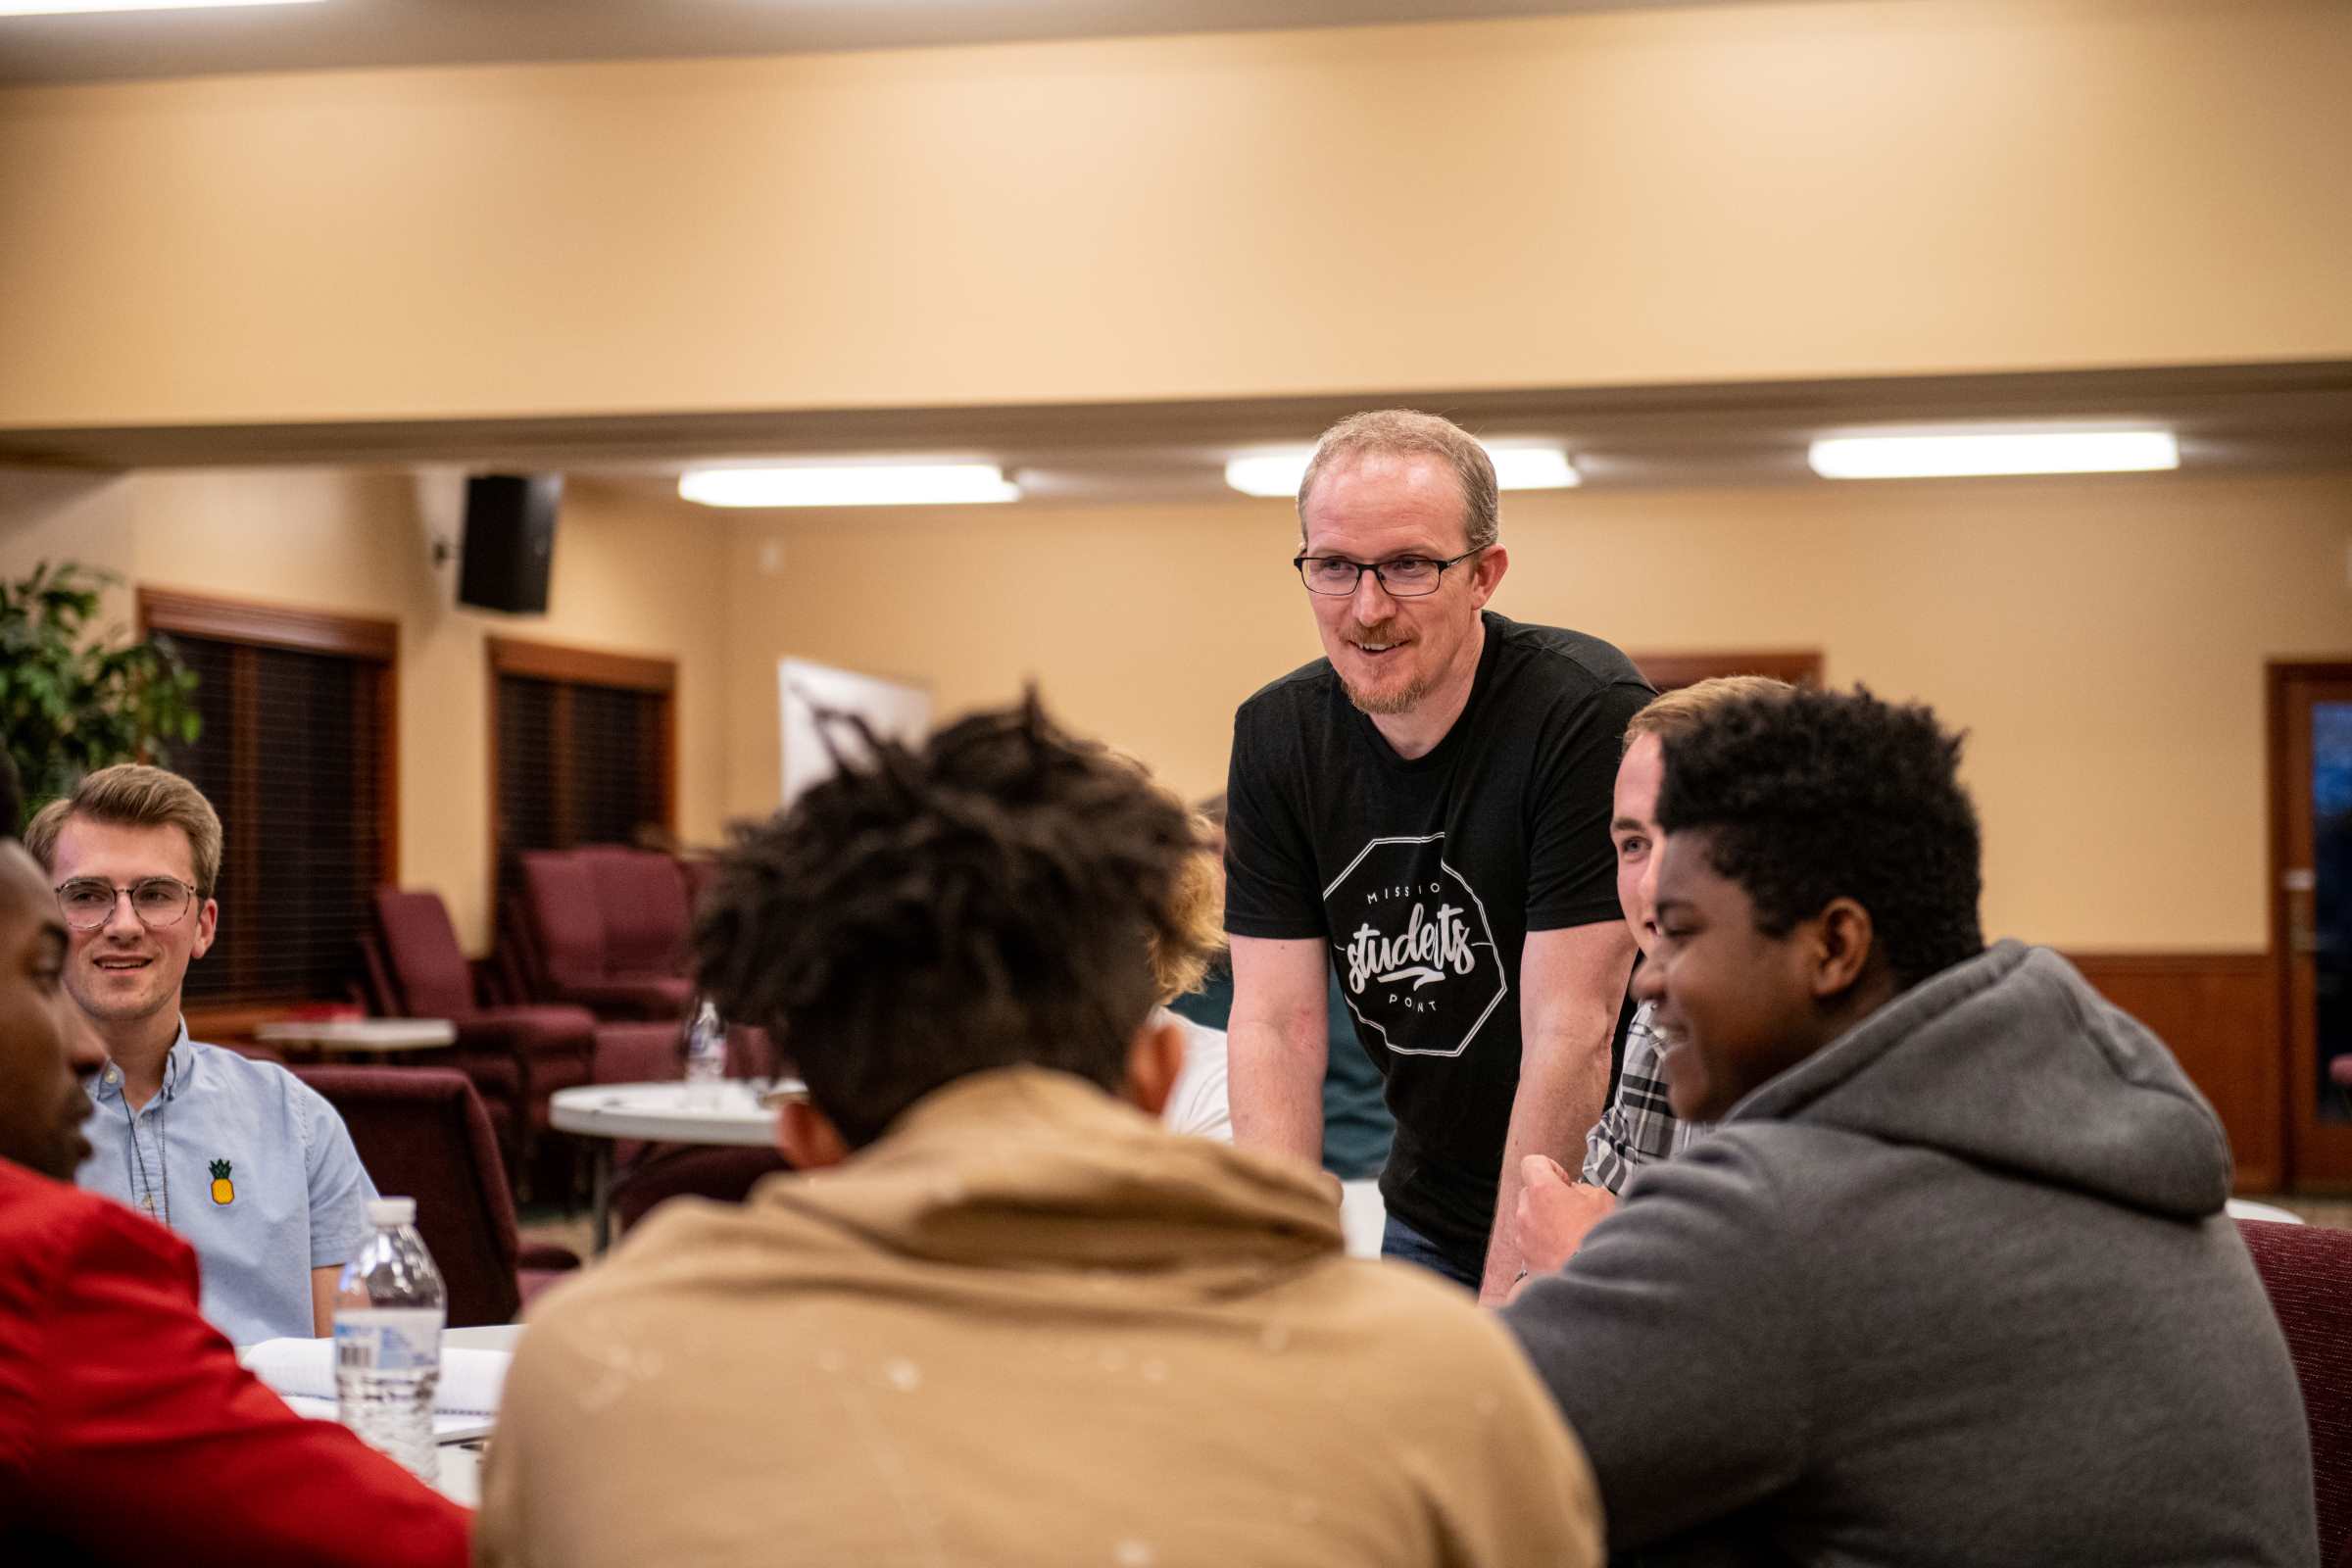 Looking for Youth Ministry Tools? Grace Theological Seminary is equipping you with student ministry resources and degrees. Whatever your path.